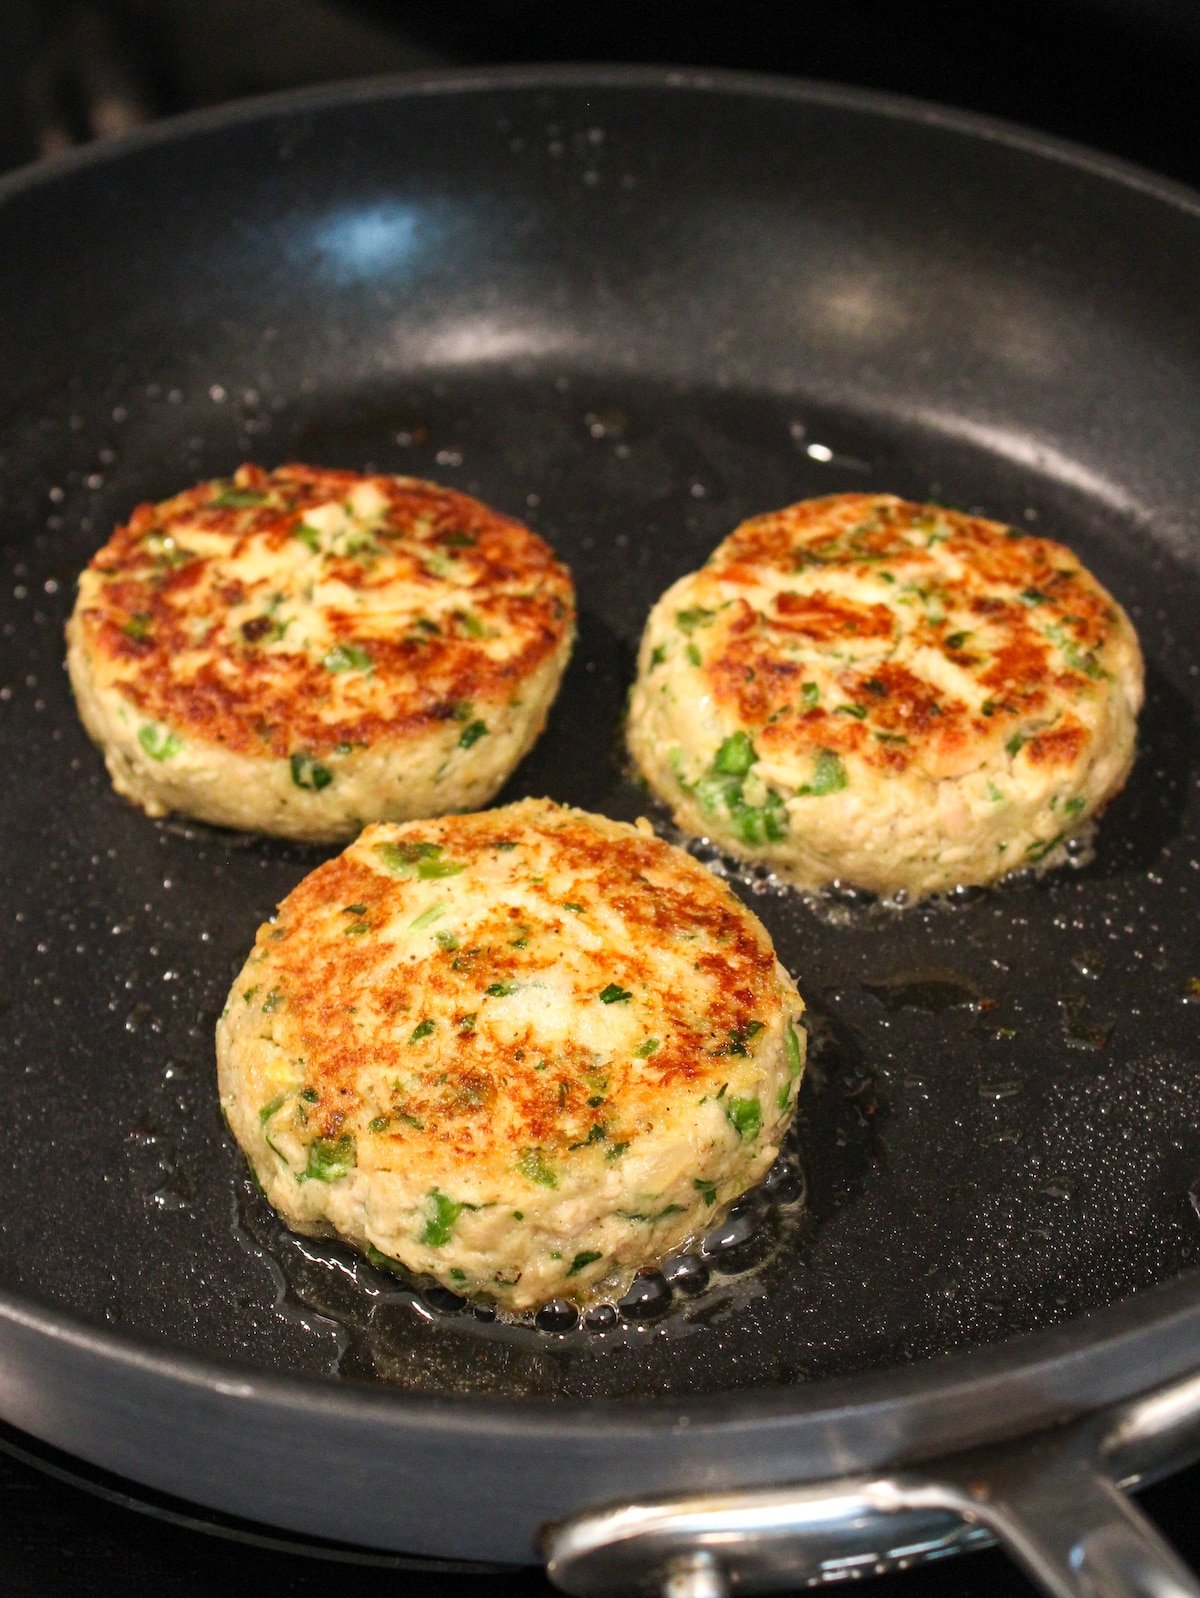 Three tuna patties frying in a nonstick skillet on the stove top.